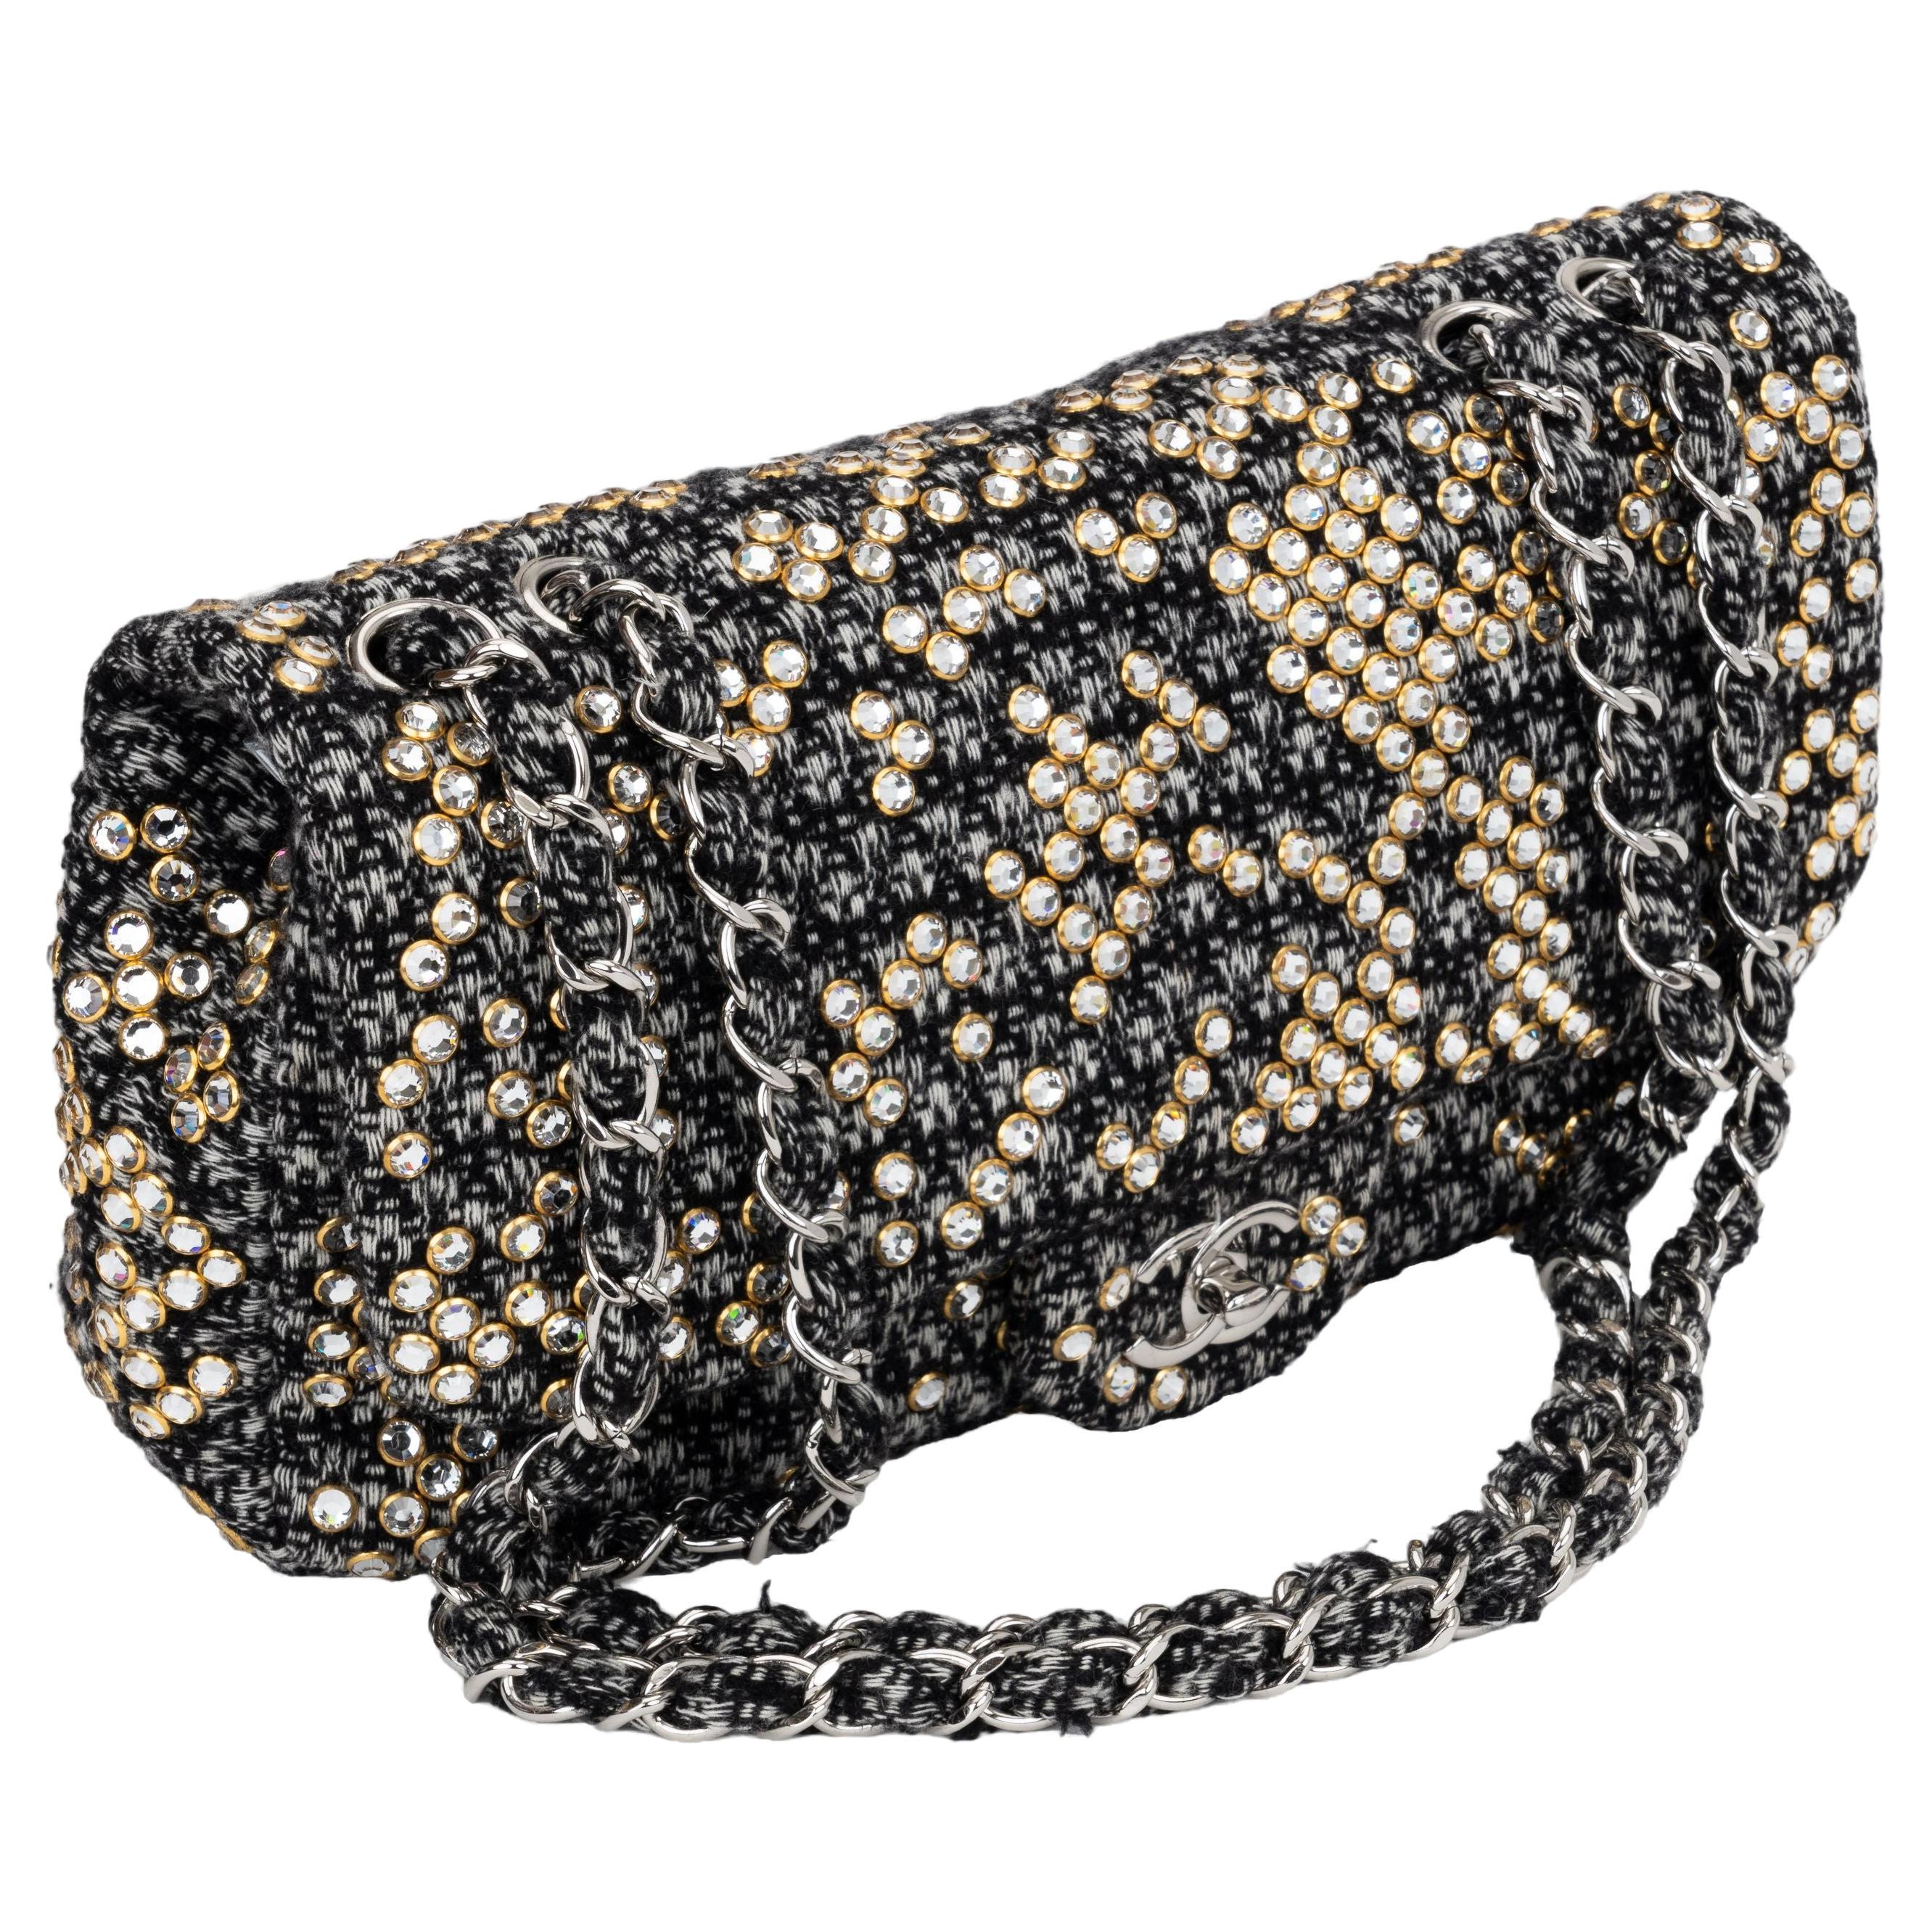 Black and white Chanel tweed classic single flap shoulder bag. Accented with Swaroski crystals, Dual chain shoulder straps. Shoulder drop 13